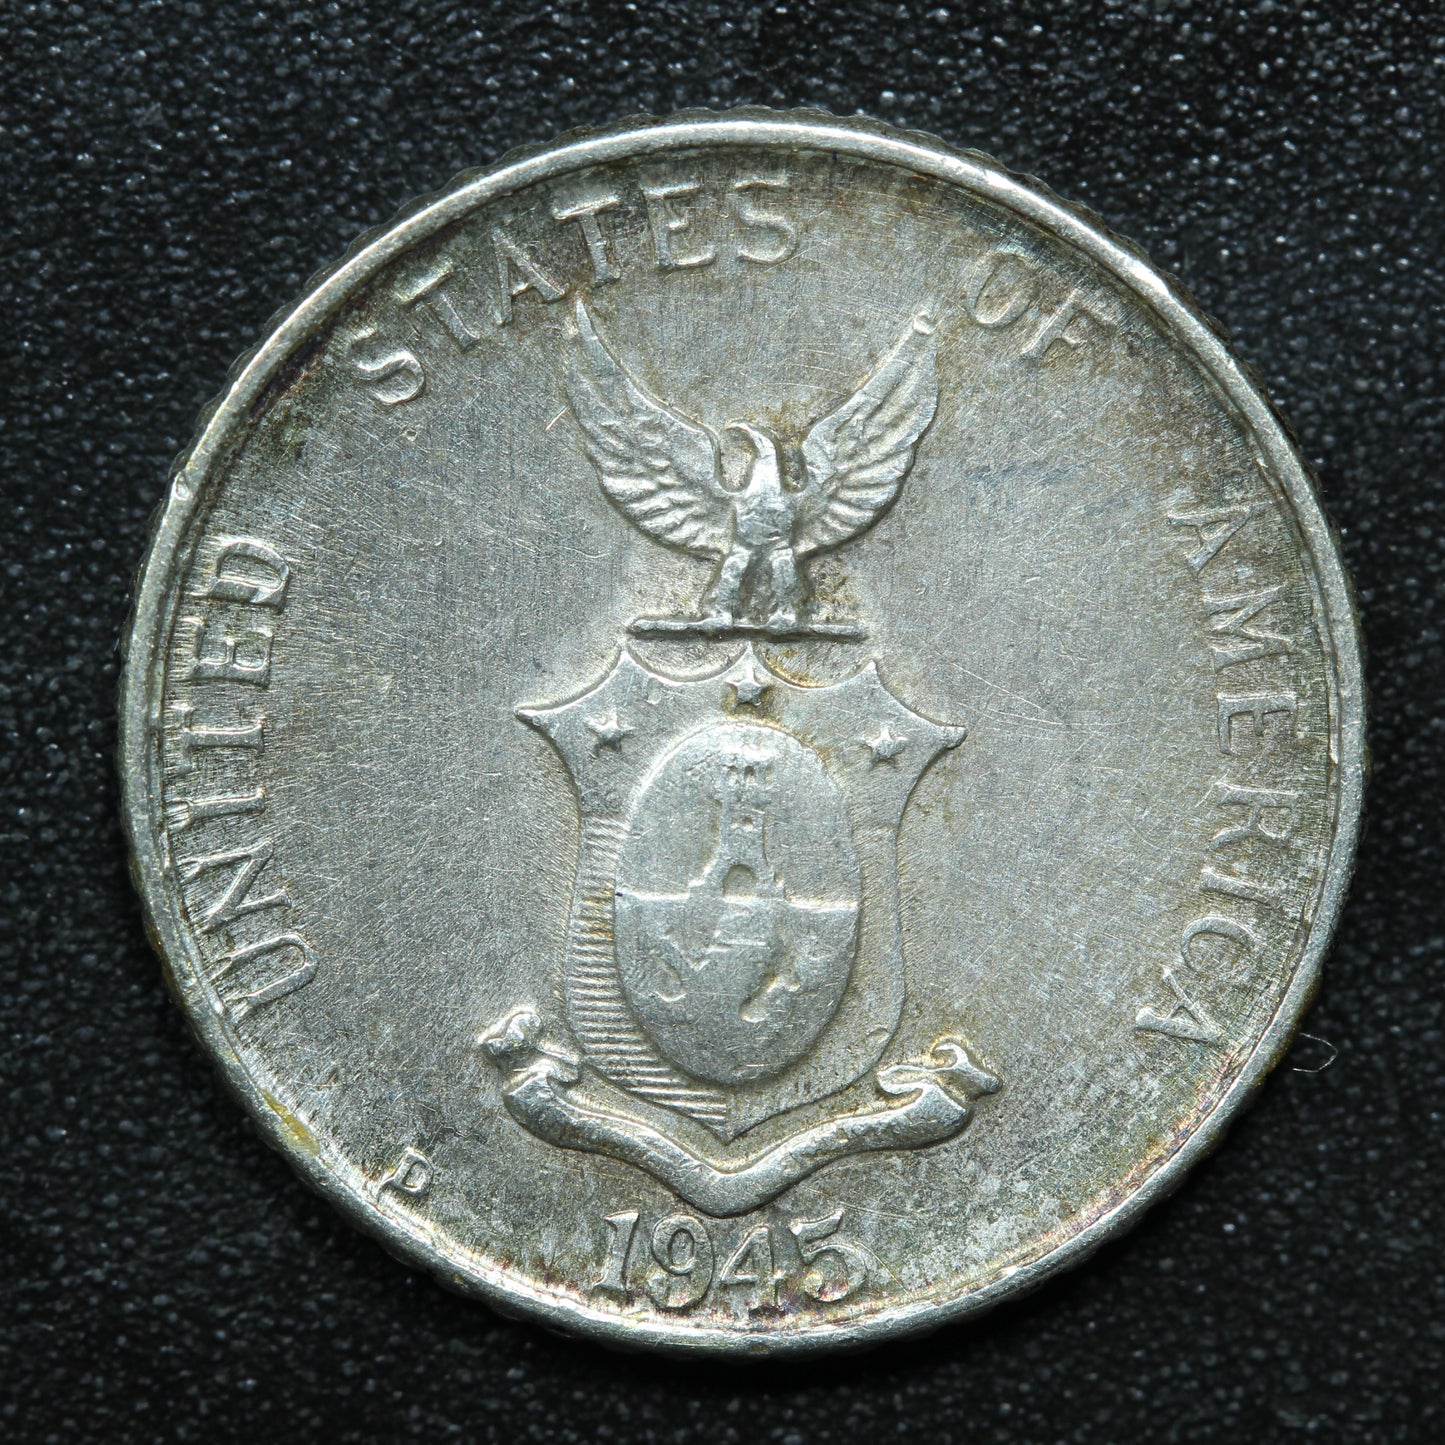 1945 D 10 Centavos Philippines Silver Coin.  75% Silver Coinage